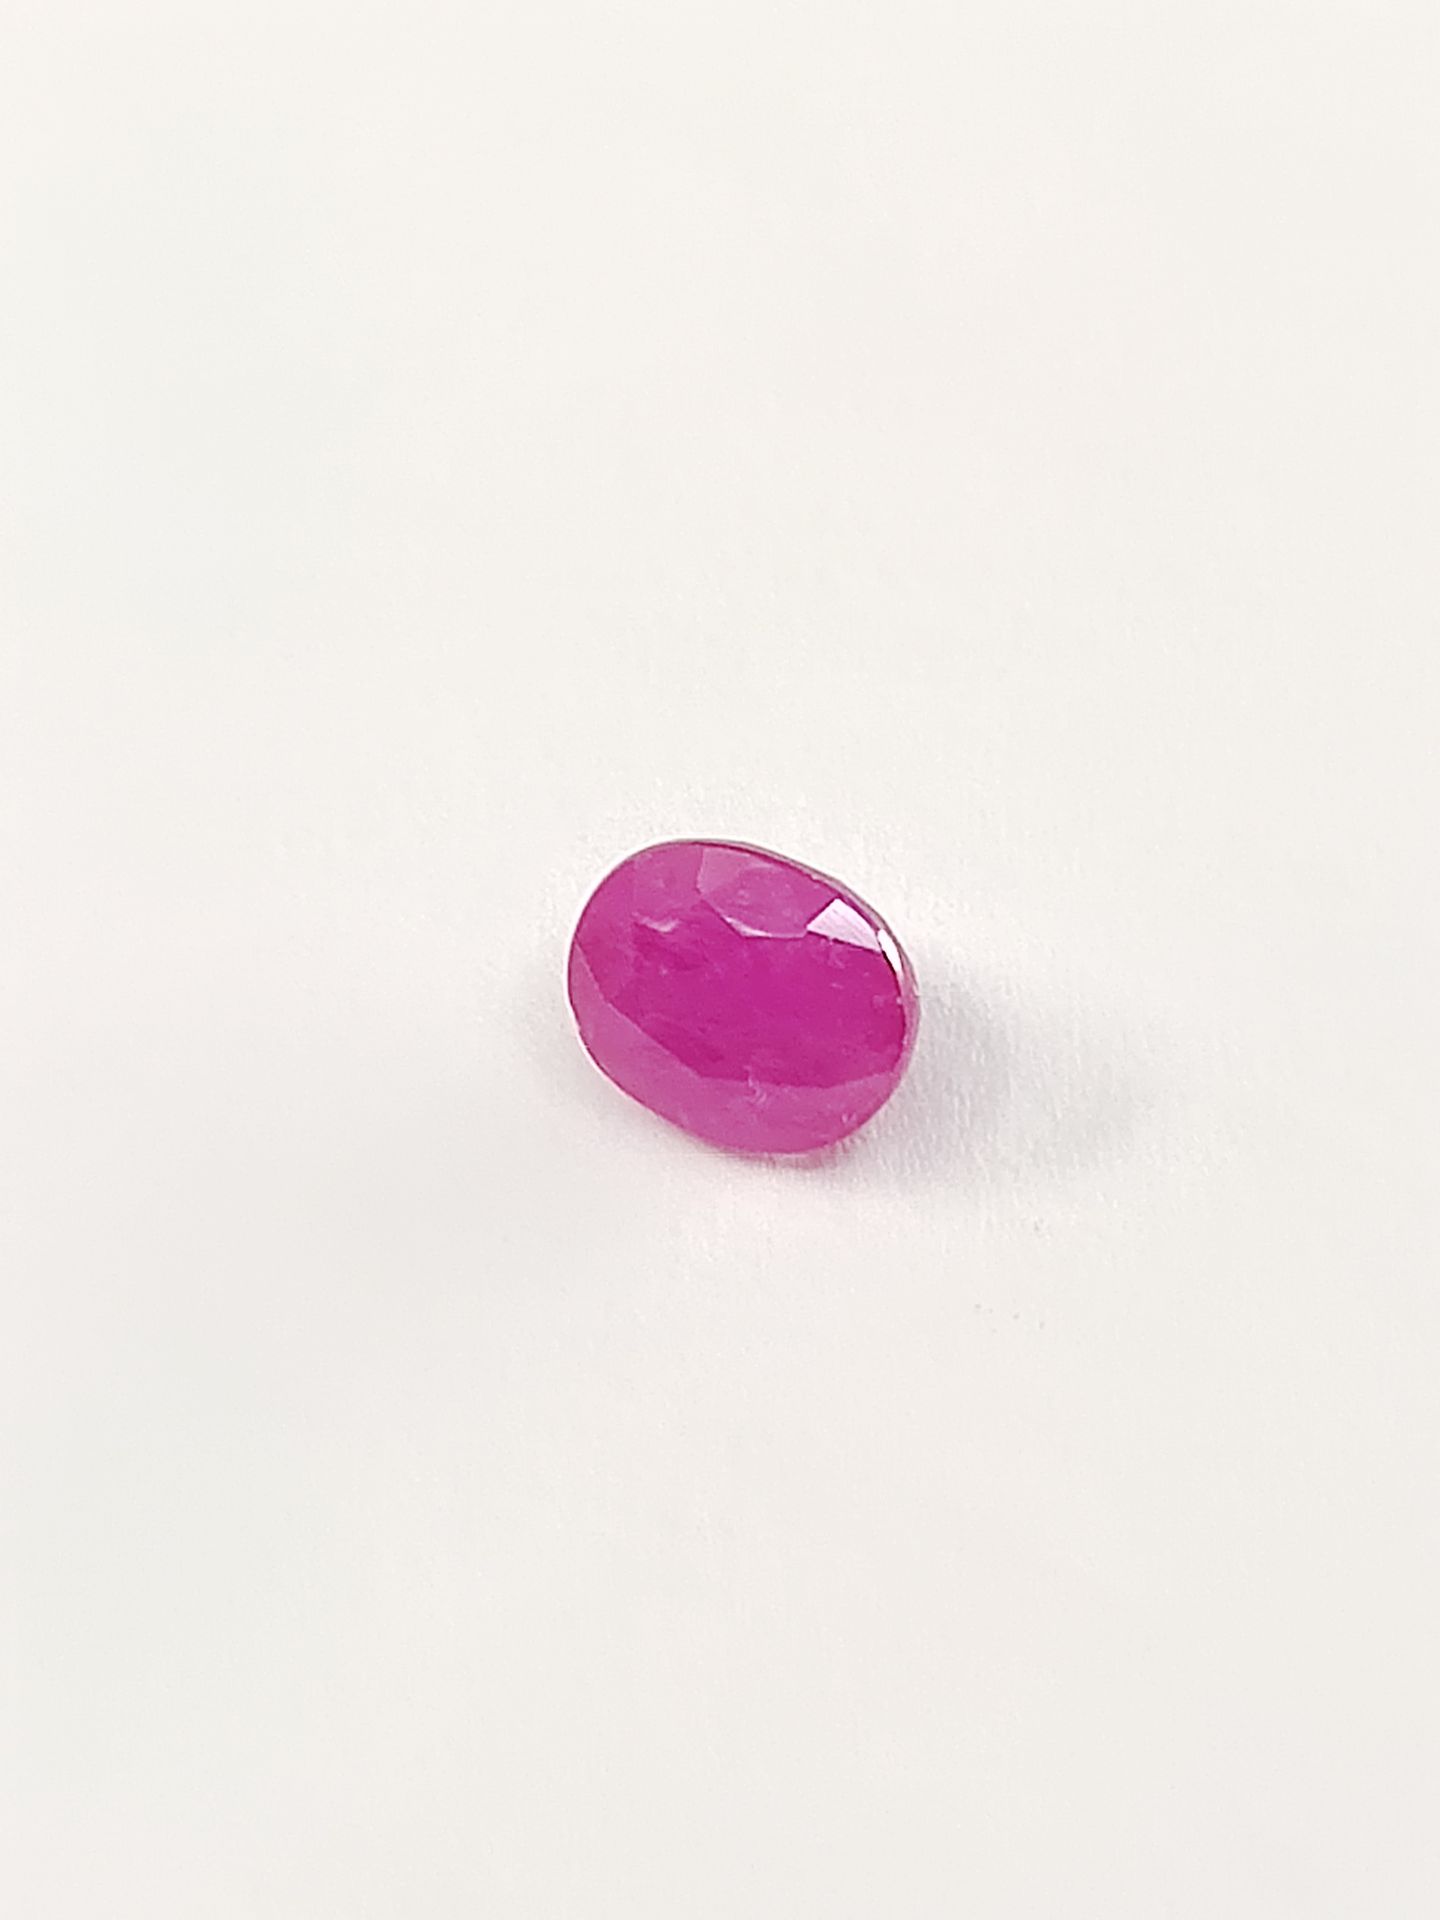 Null Oval pinkish red ruby, Madagascar, 1.95 carats 


Size : 7 x 6